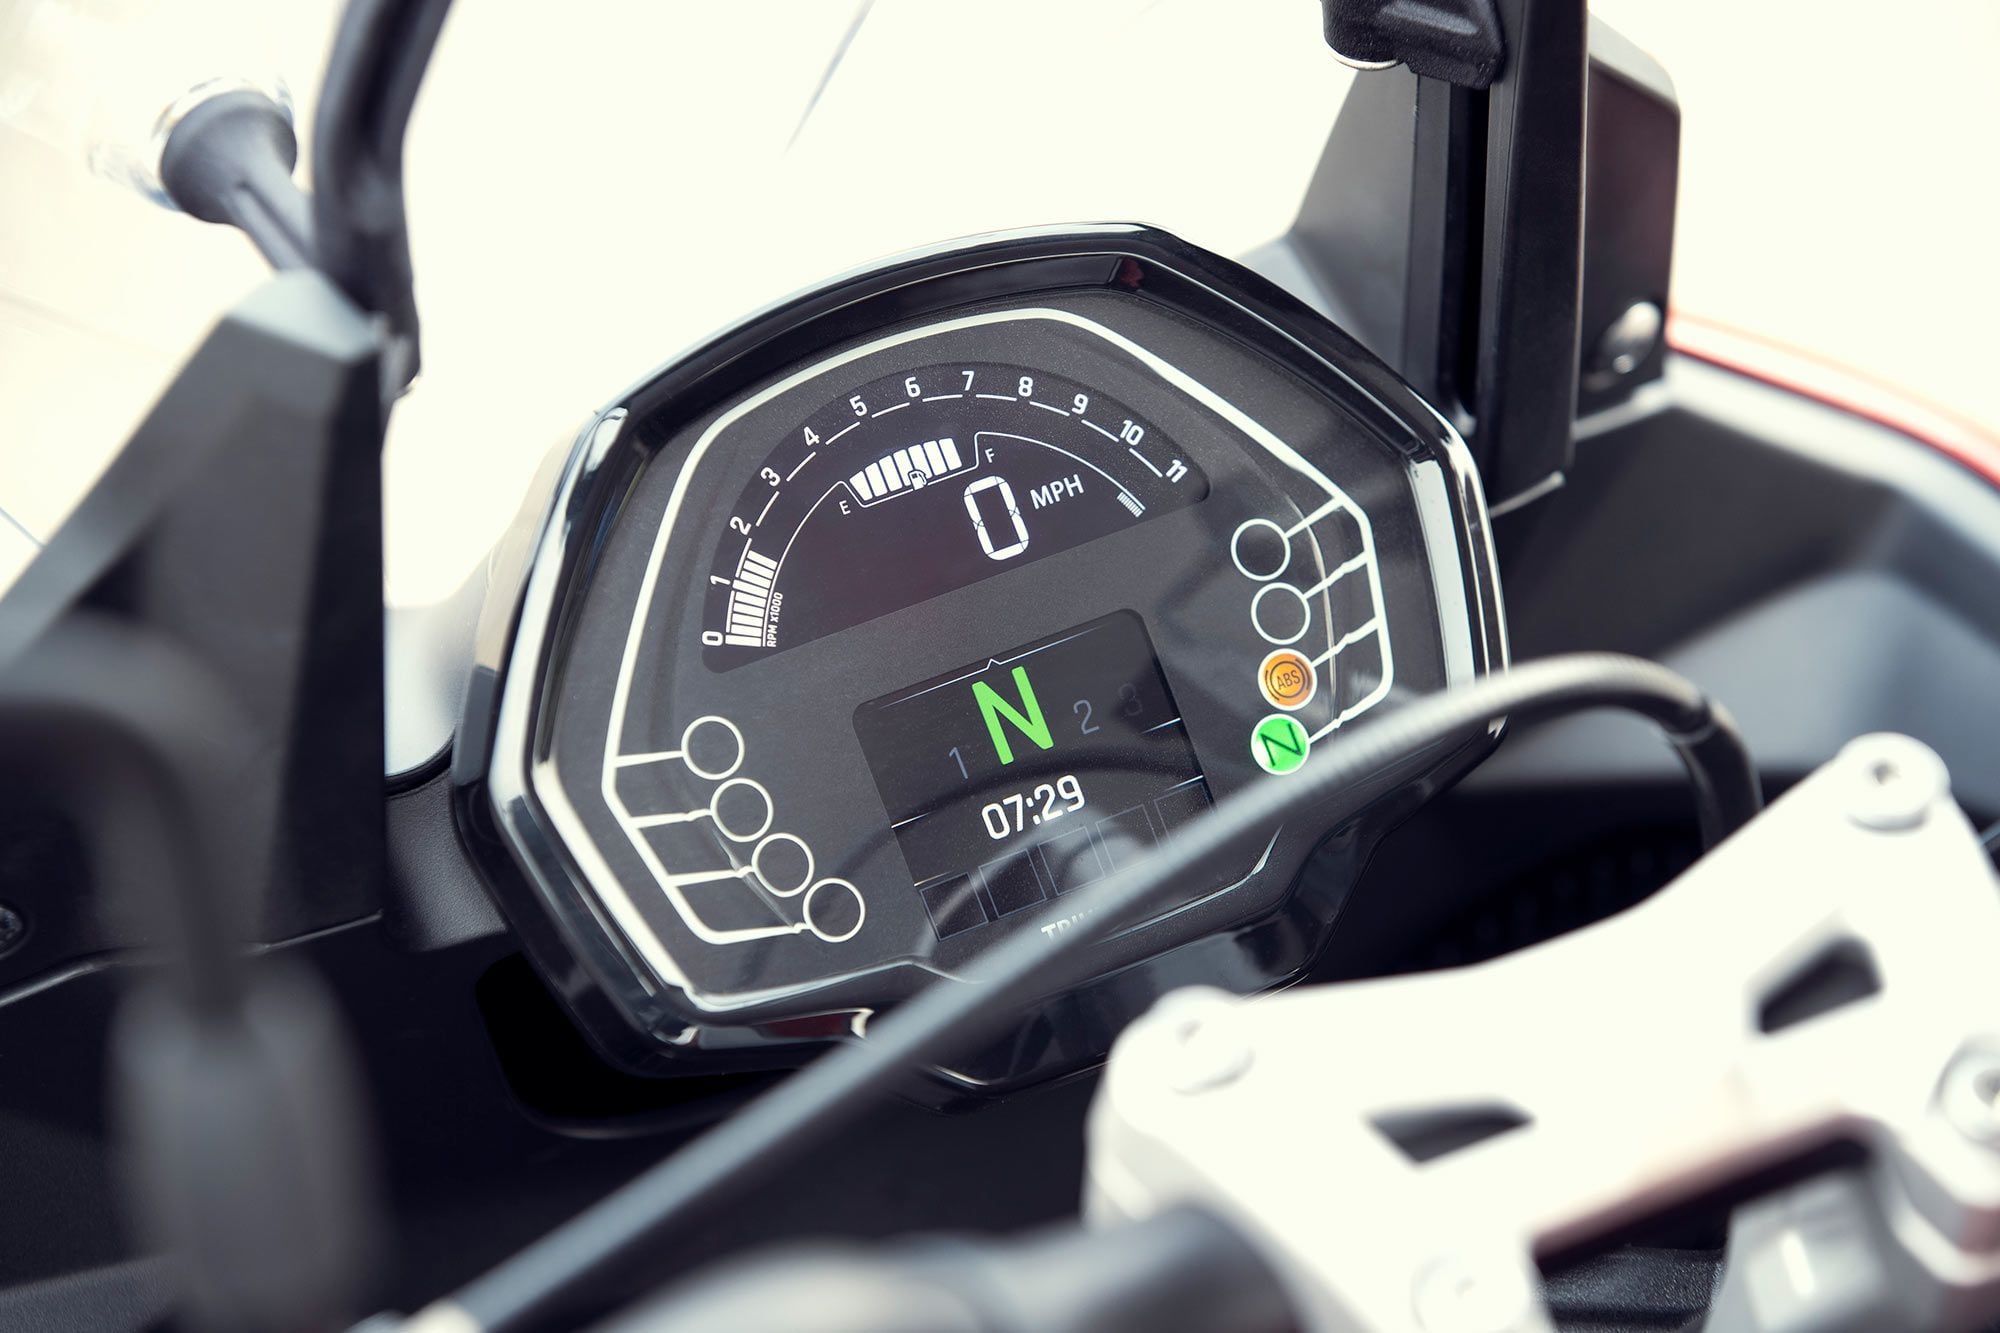 The Tiger gets a simplistic TFT display to show important riding information.